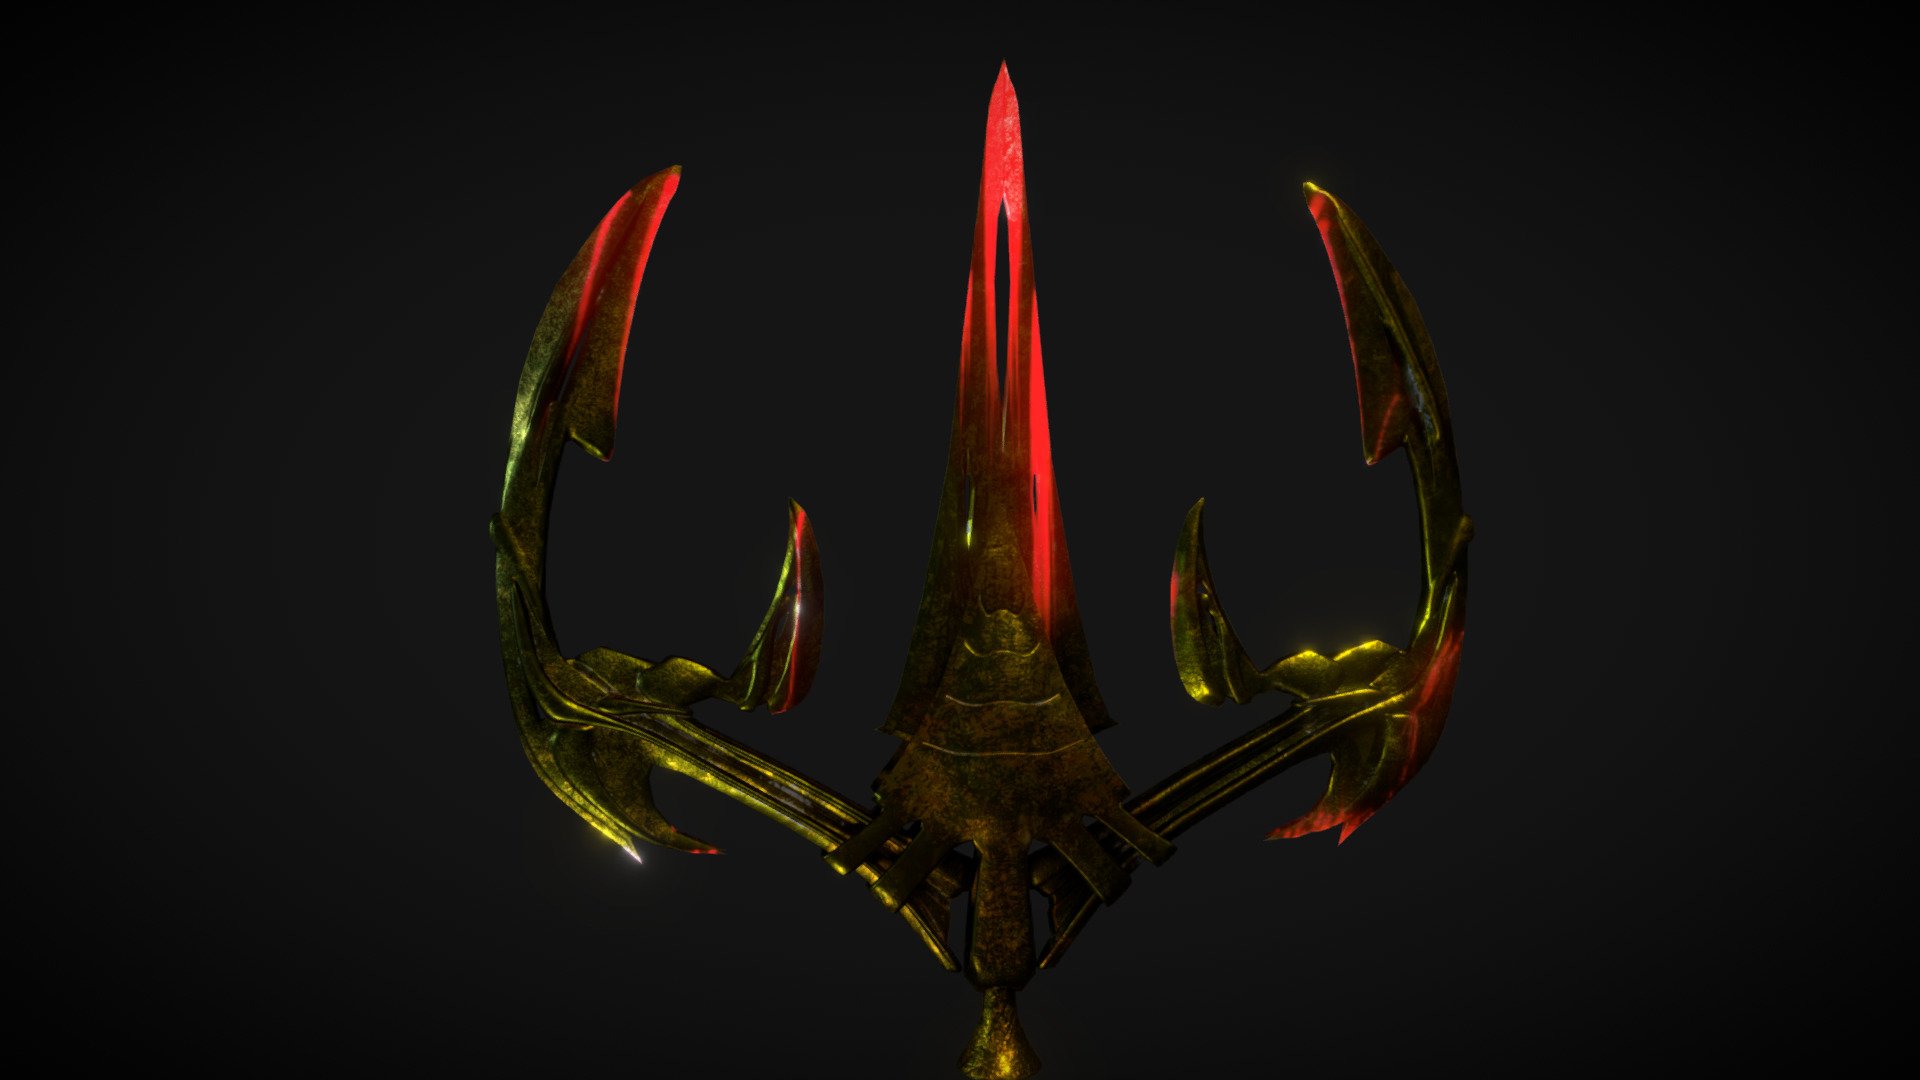 Trident referenced from God of War, Assasin's Creed and Hades. Modeled in Maya and textured in Substance Painter 3d model